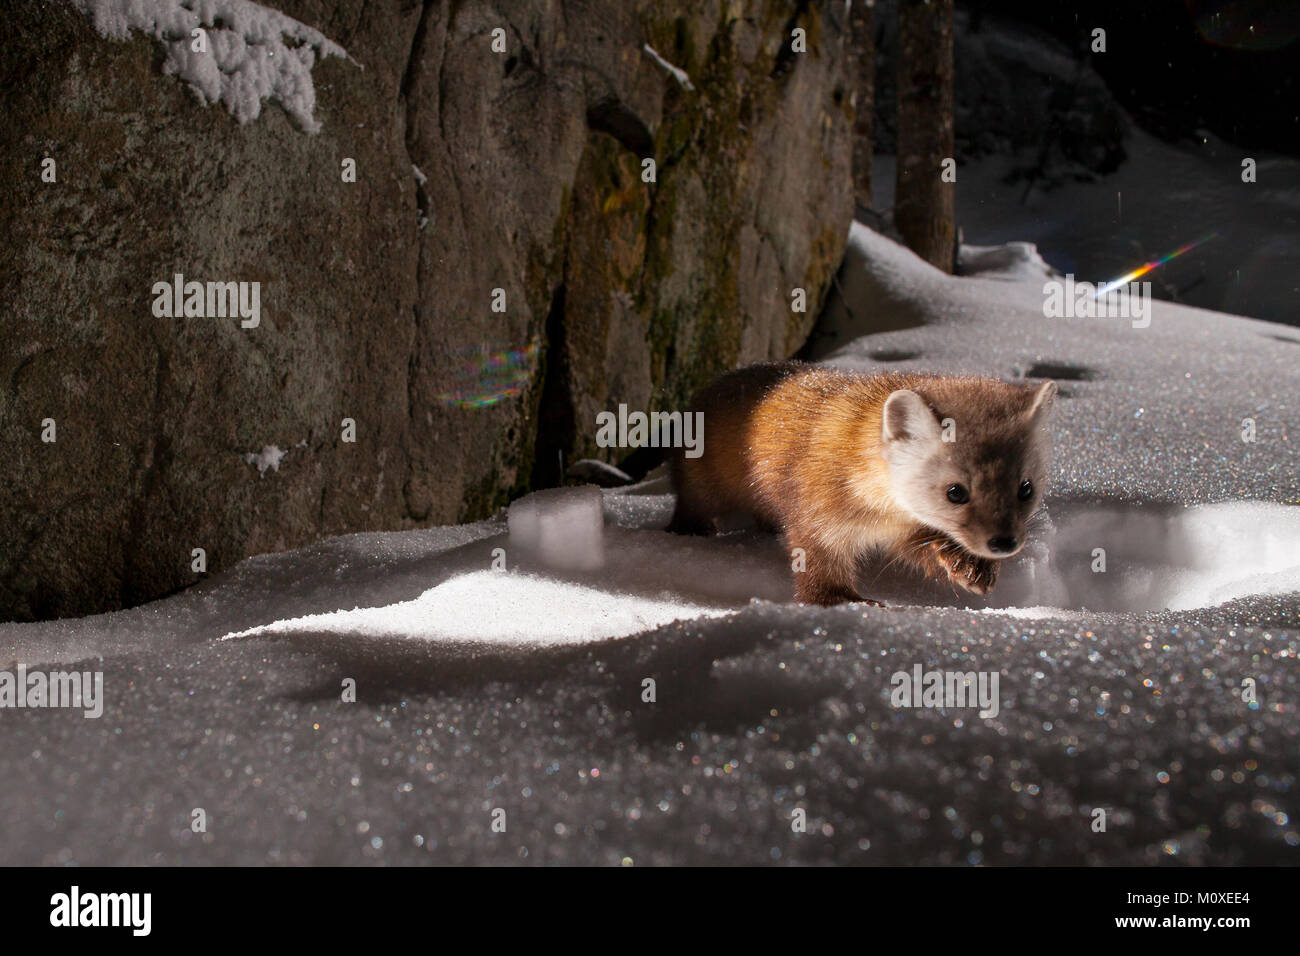 MAYNOOTH, ONTARIO, CANADA - January 23, 2018: A marten (Martes americana), part of the Weasel family / Mustelidae forages for food. Stock Photo